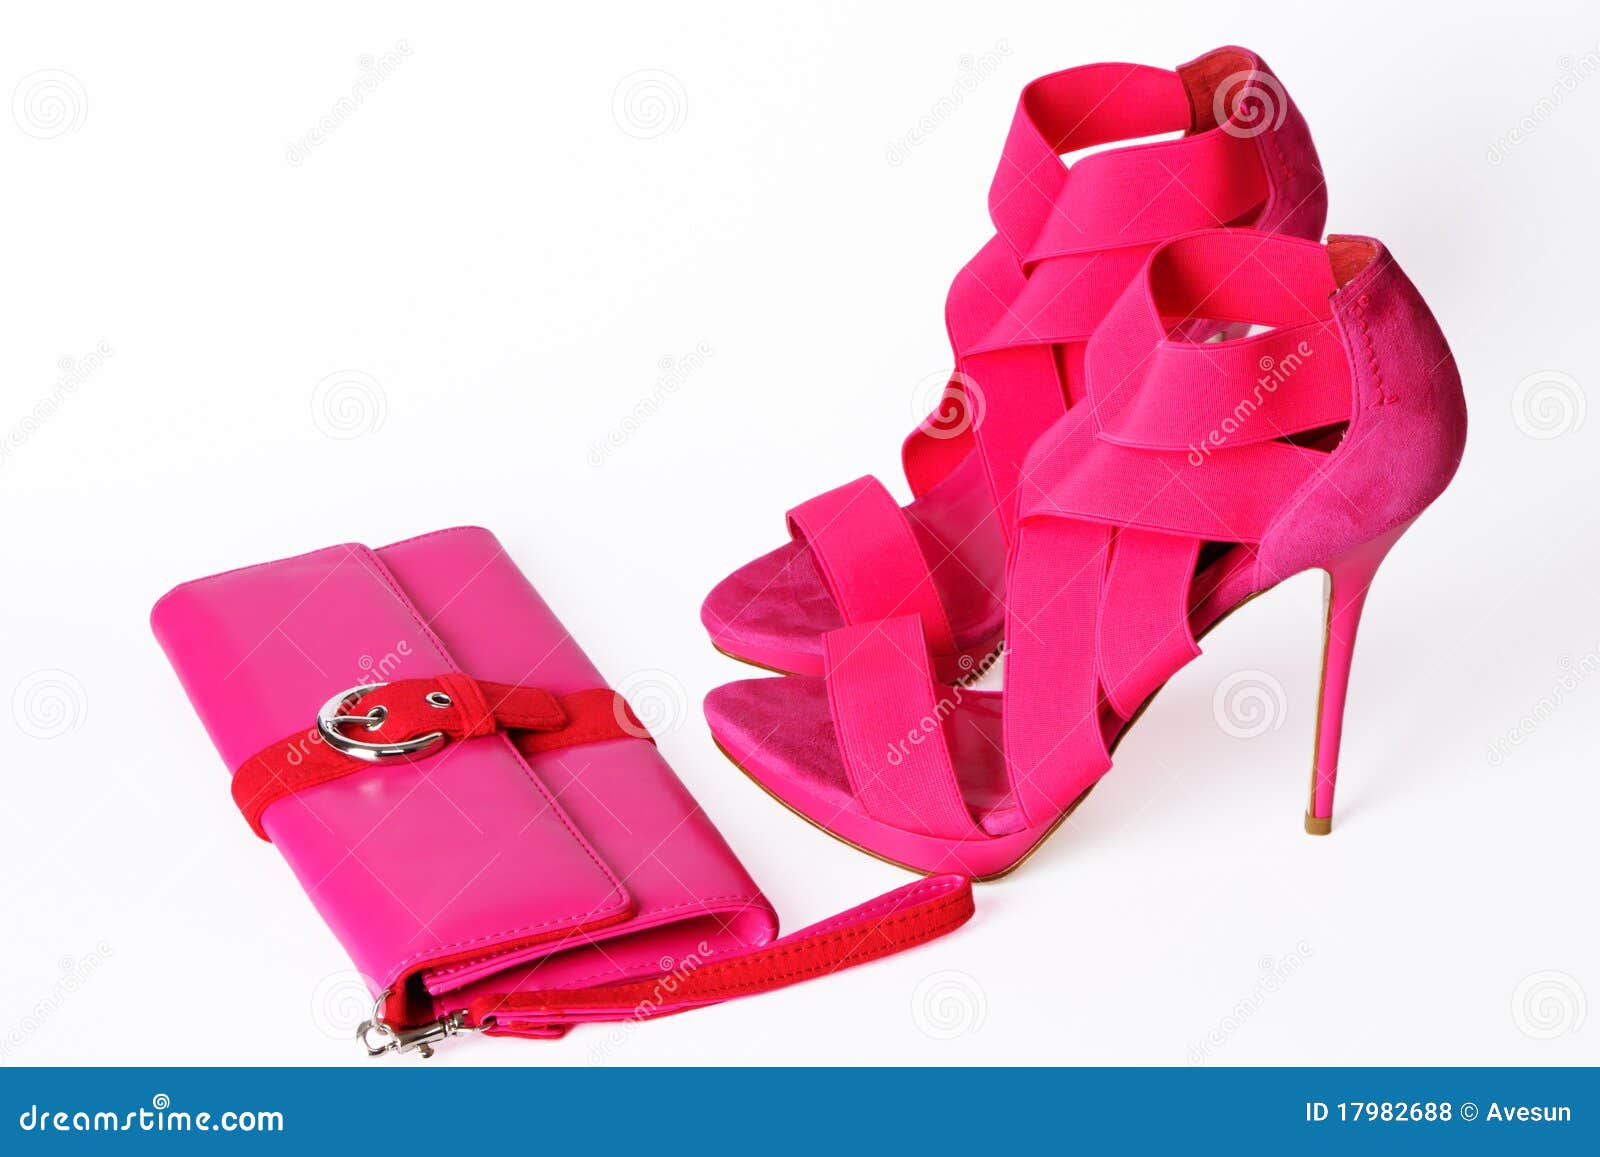 fashionable pink shoes